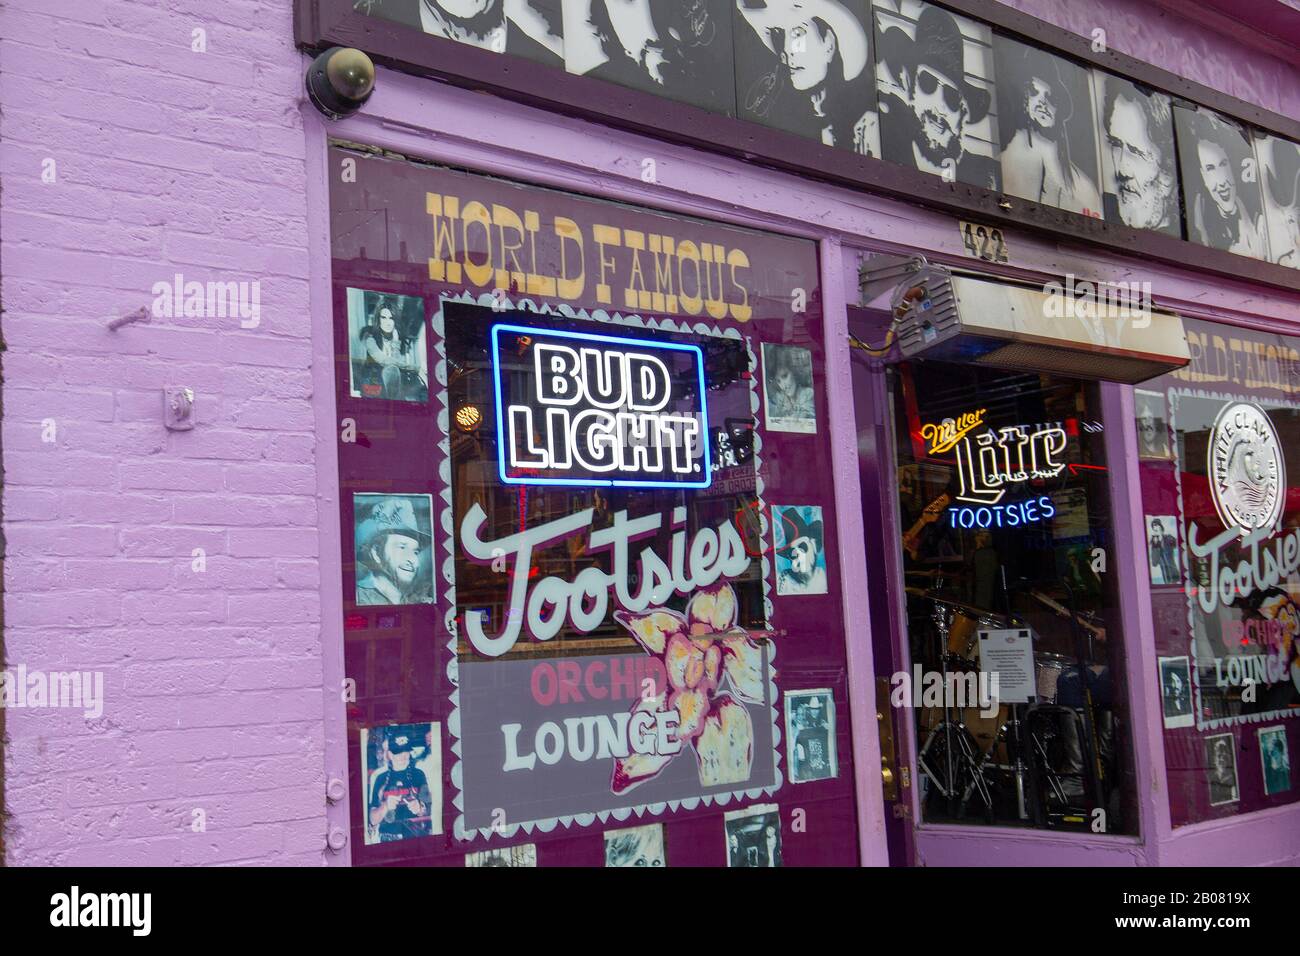 Tootsies Orchid Lounge, a Nashville country music institution and world-famous honky-tonk, has operated across the alley from the Ryman on lower Broad Stock Photo